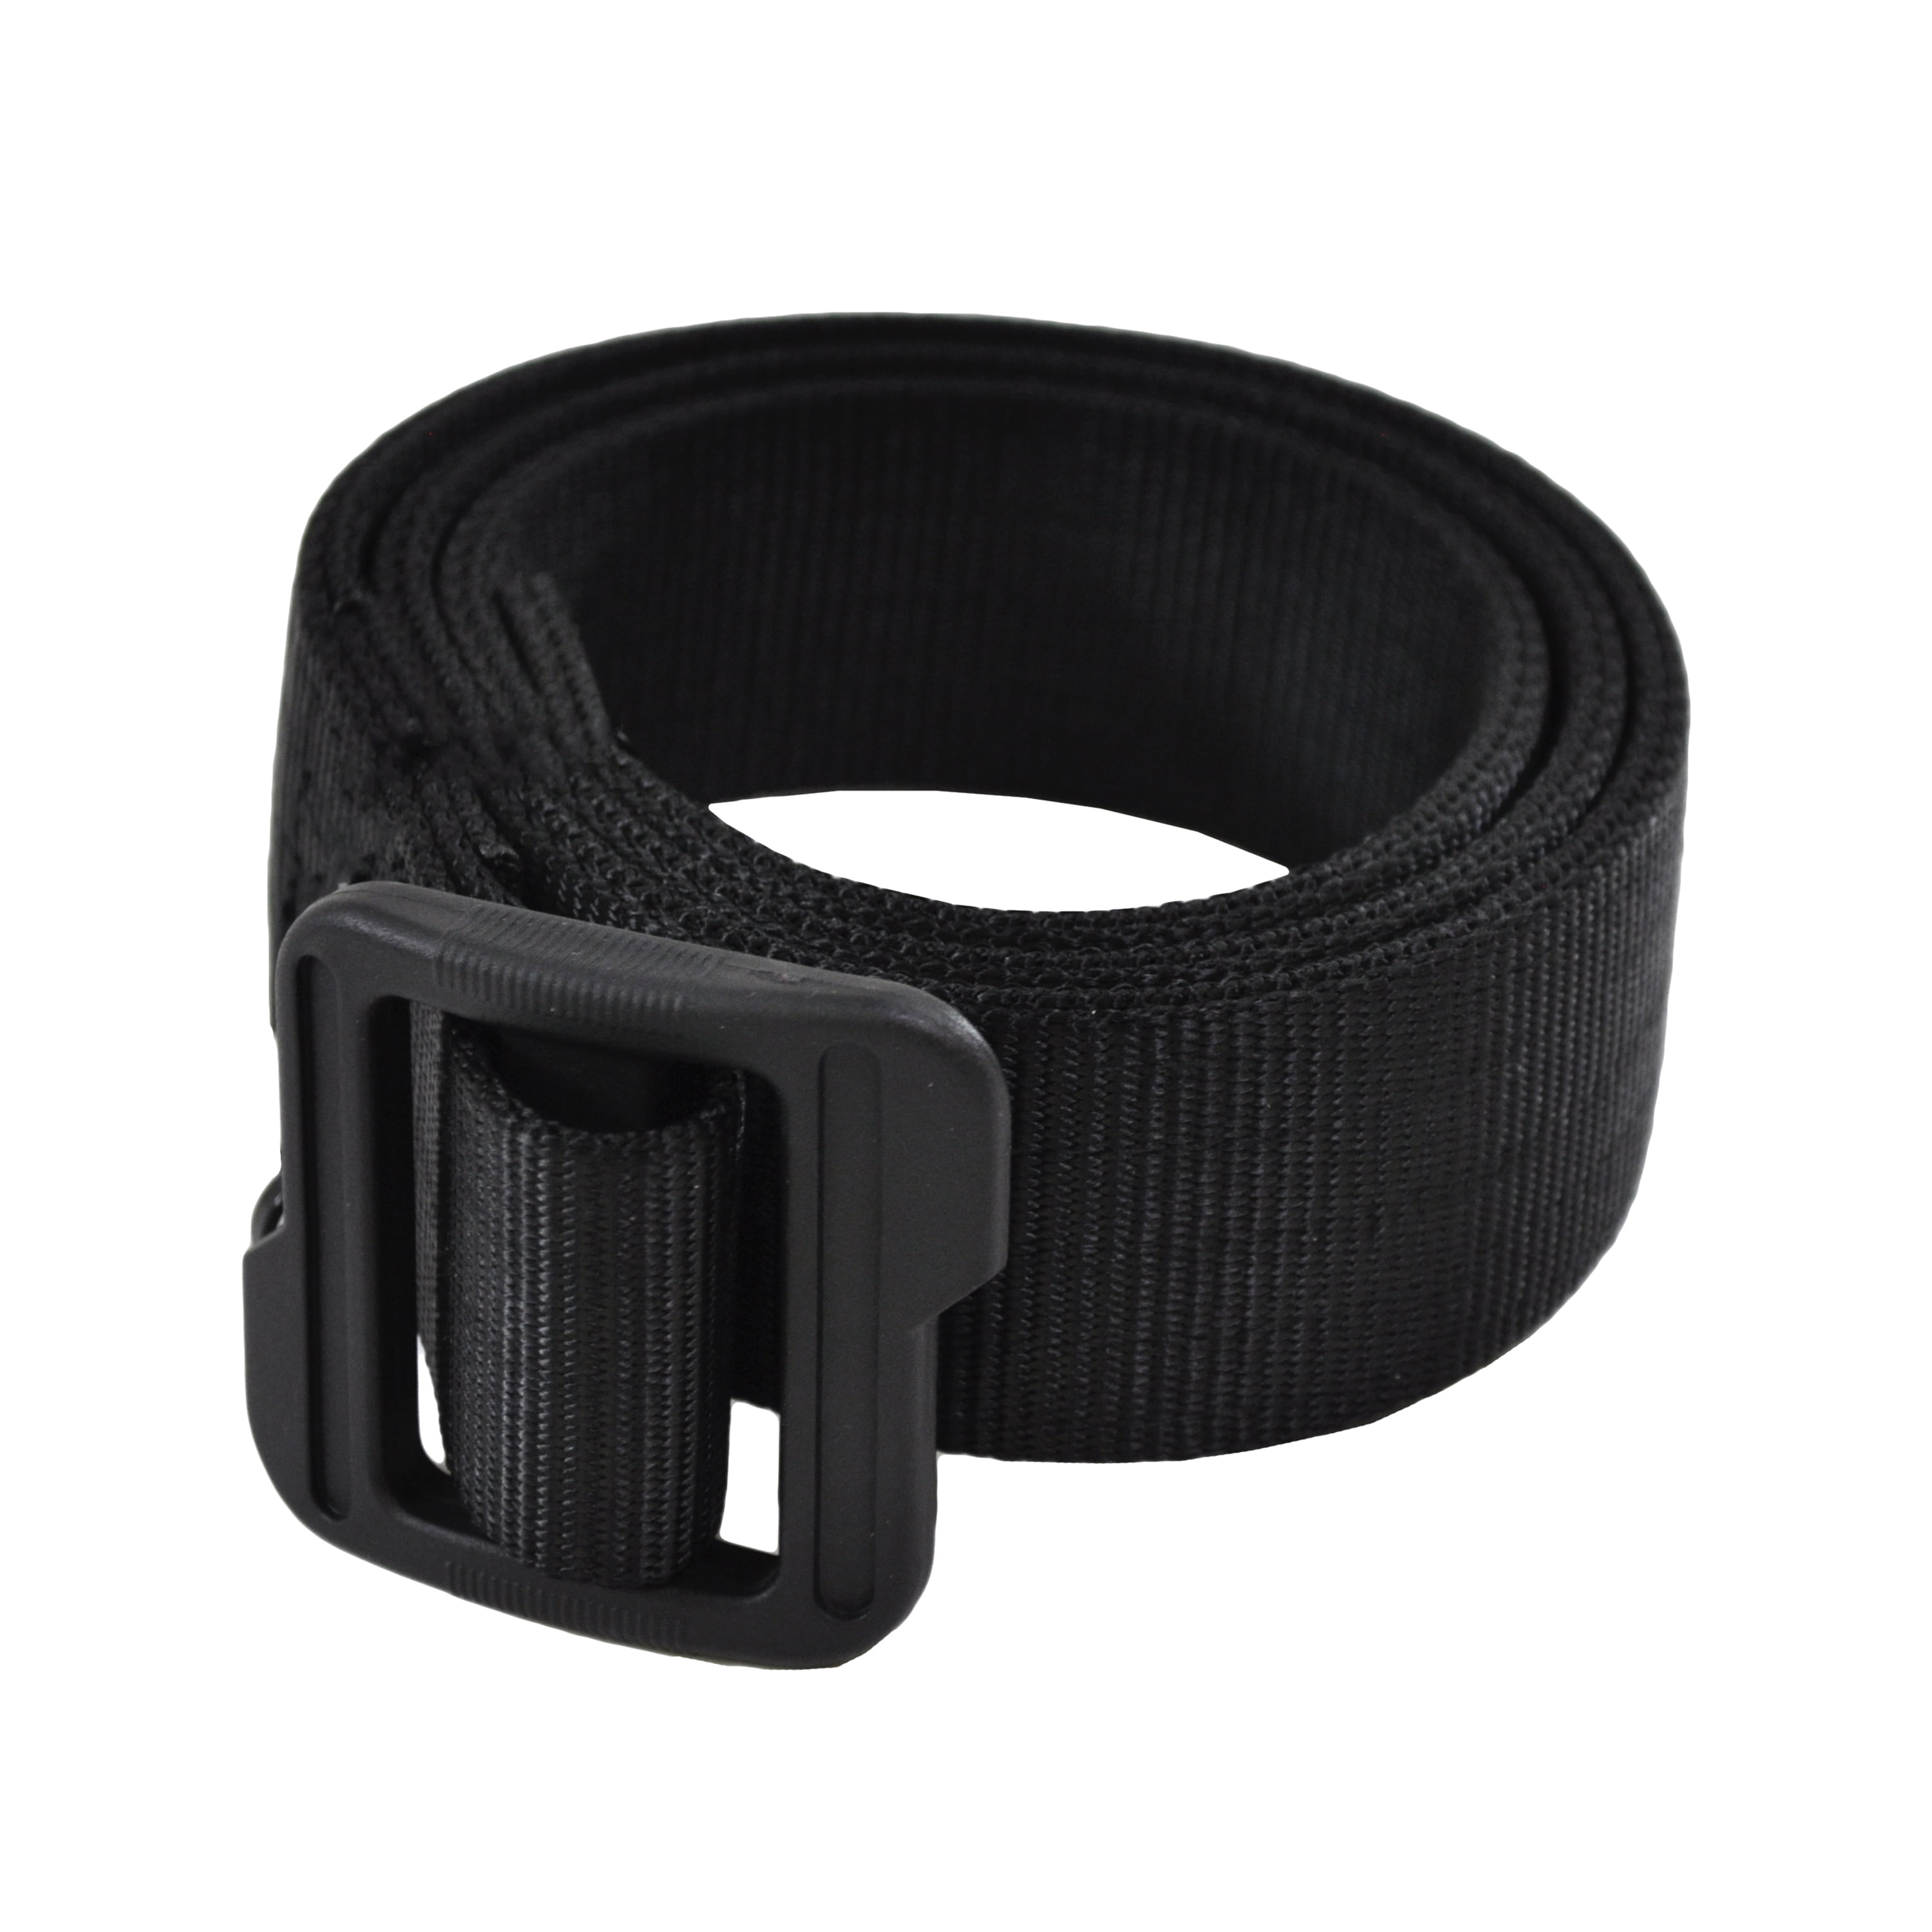 Bulldog Cases Deluxe Double Web Belts (Fits Waists 48